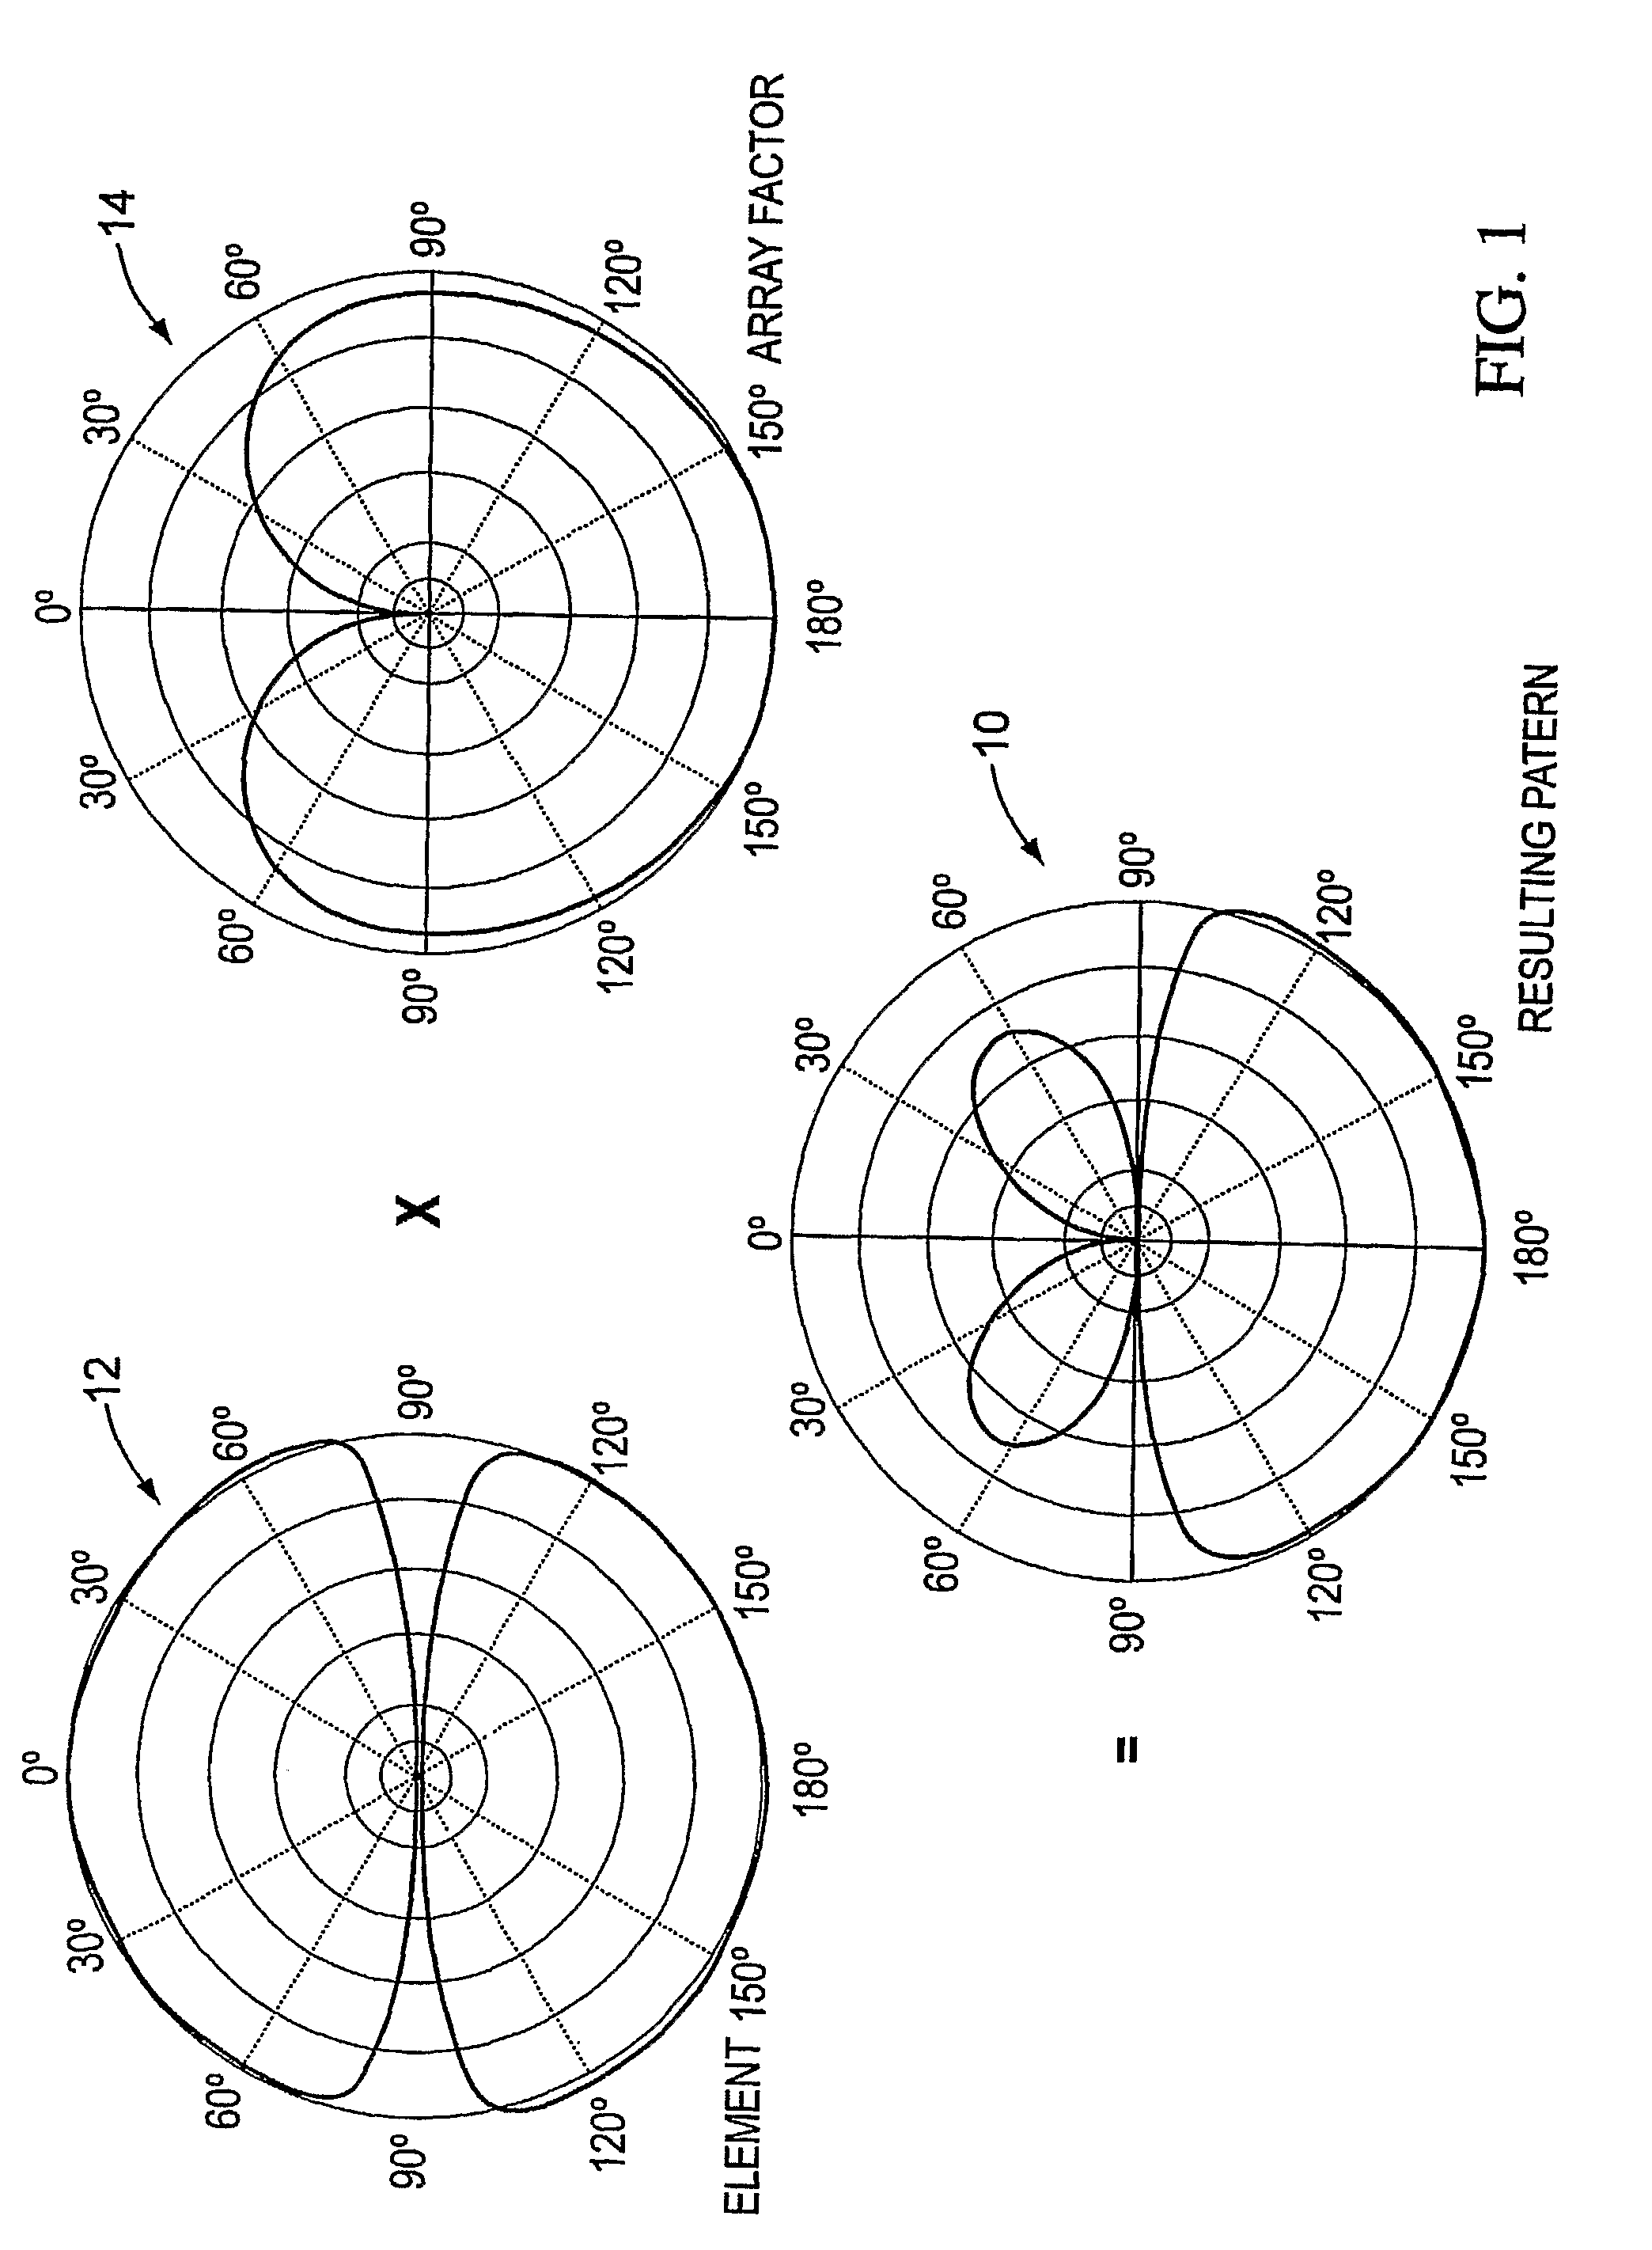 True time delay phase array radar using rotary clocks and electronic delay lines